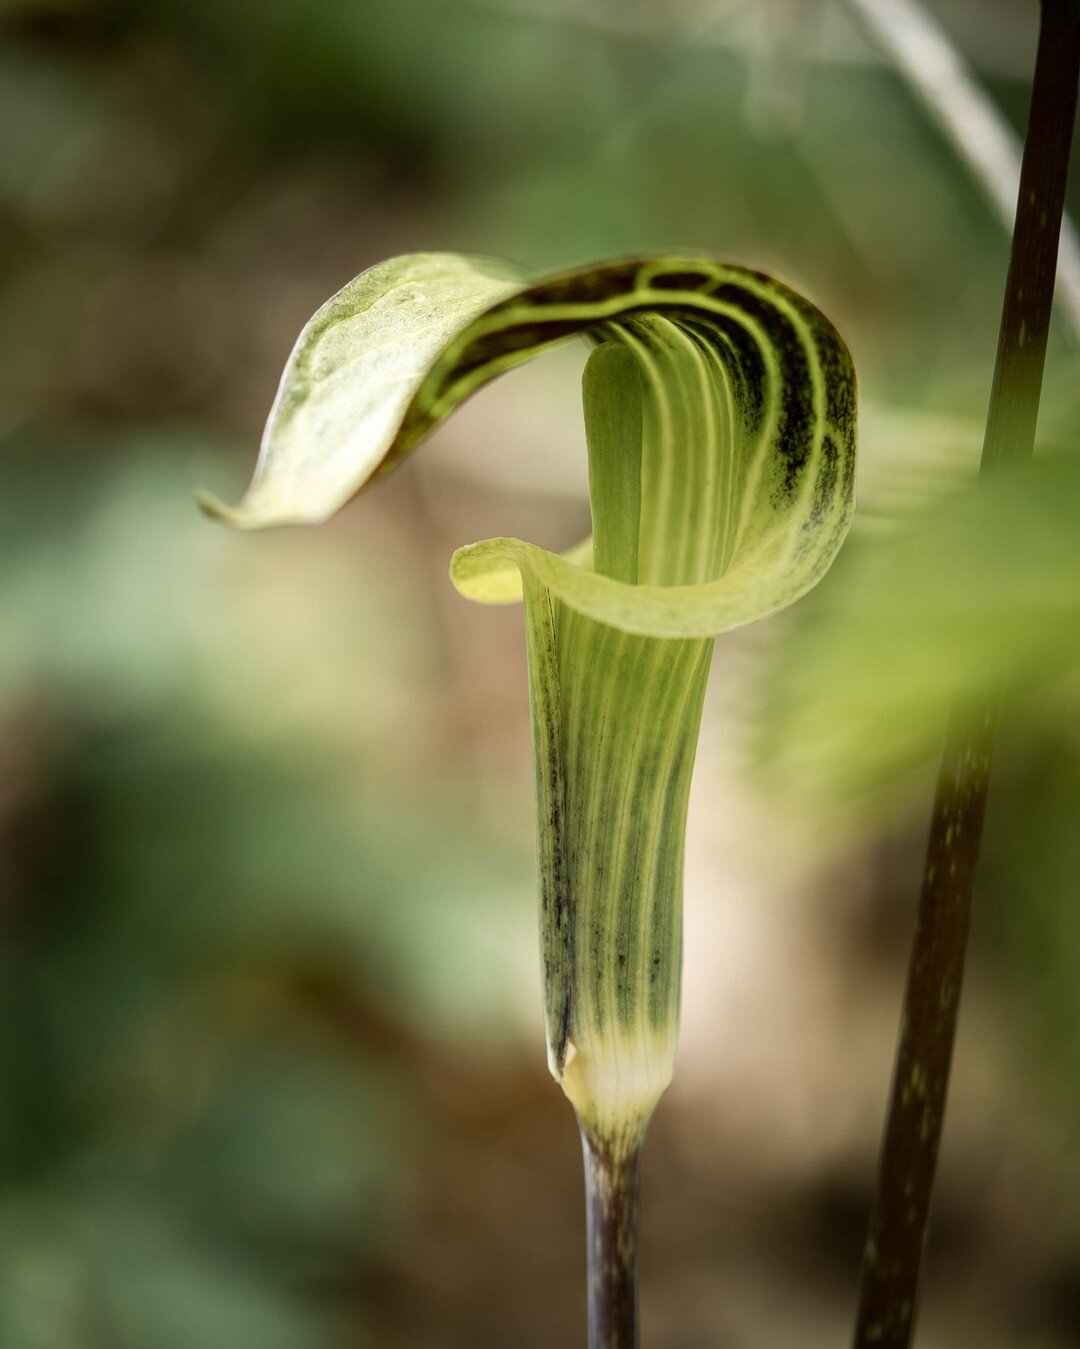 How many of you have seen Jack-in-the-pulpit (Arisaema triphyllum) while hiking through Minnesota&rsquo;s forests? While it may be exciting for us native plant enthusiasts to come across, it&rsquo;s even more so for birds and other wildlife since the